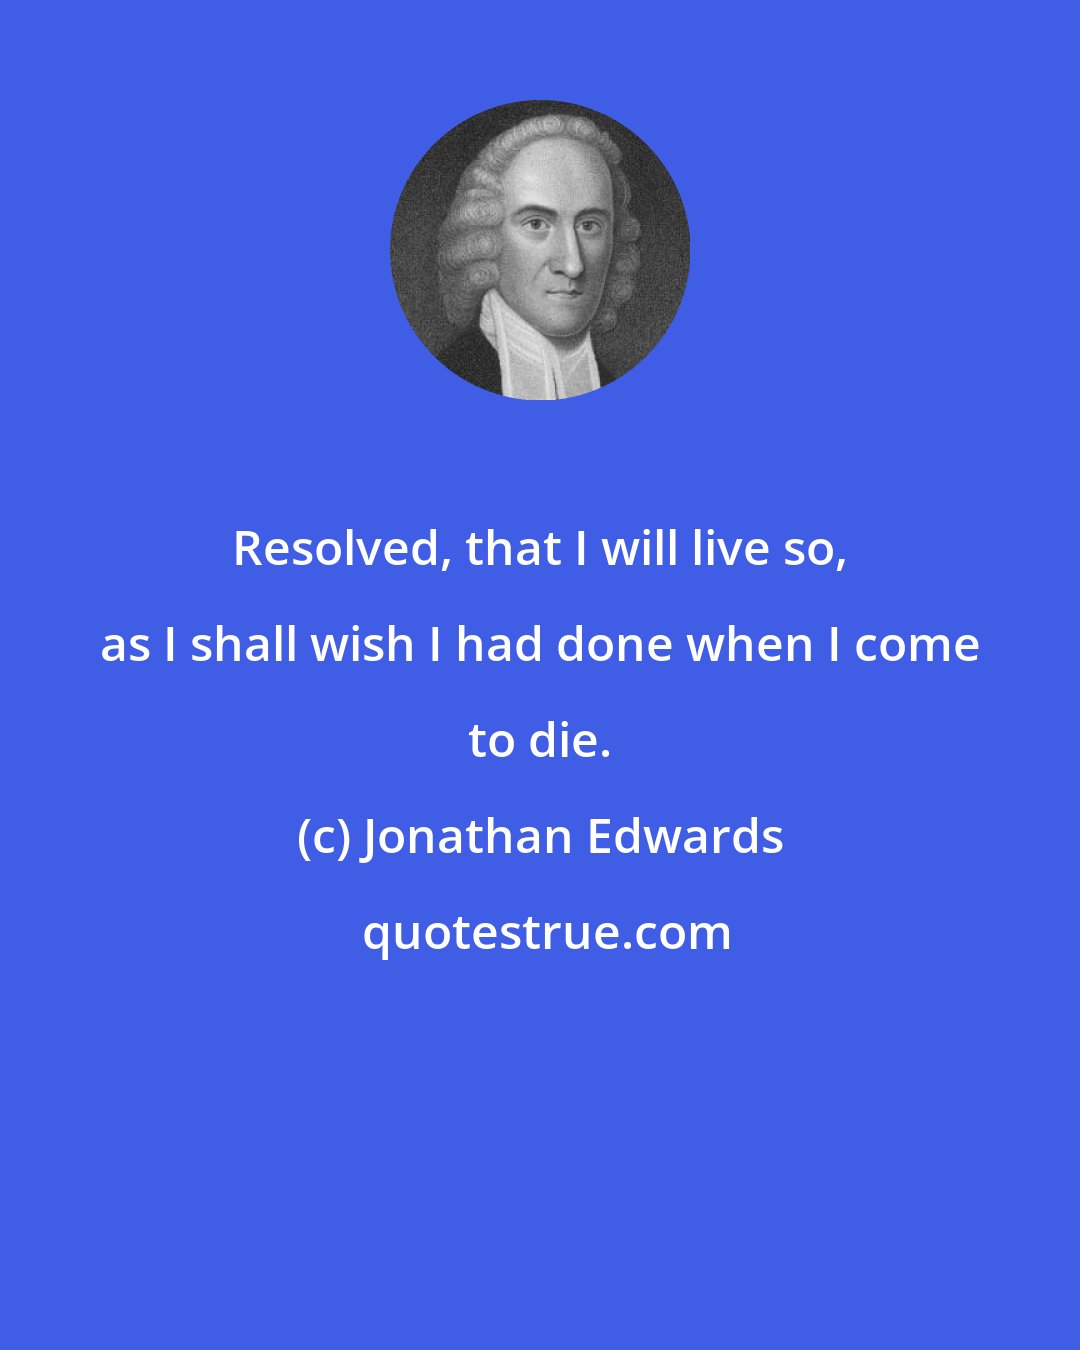 Jonathan Edwards: Resolved, that I will live so, as I shall wish I had done when I come to die.